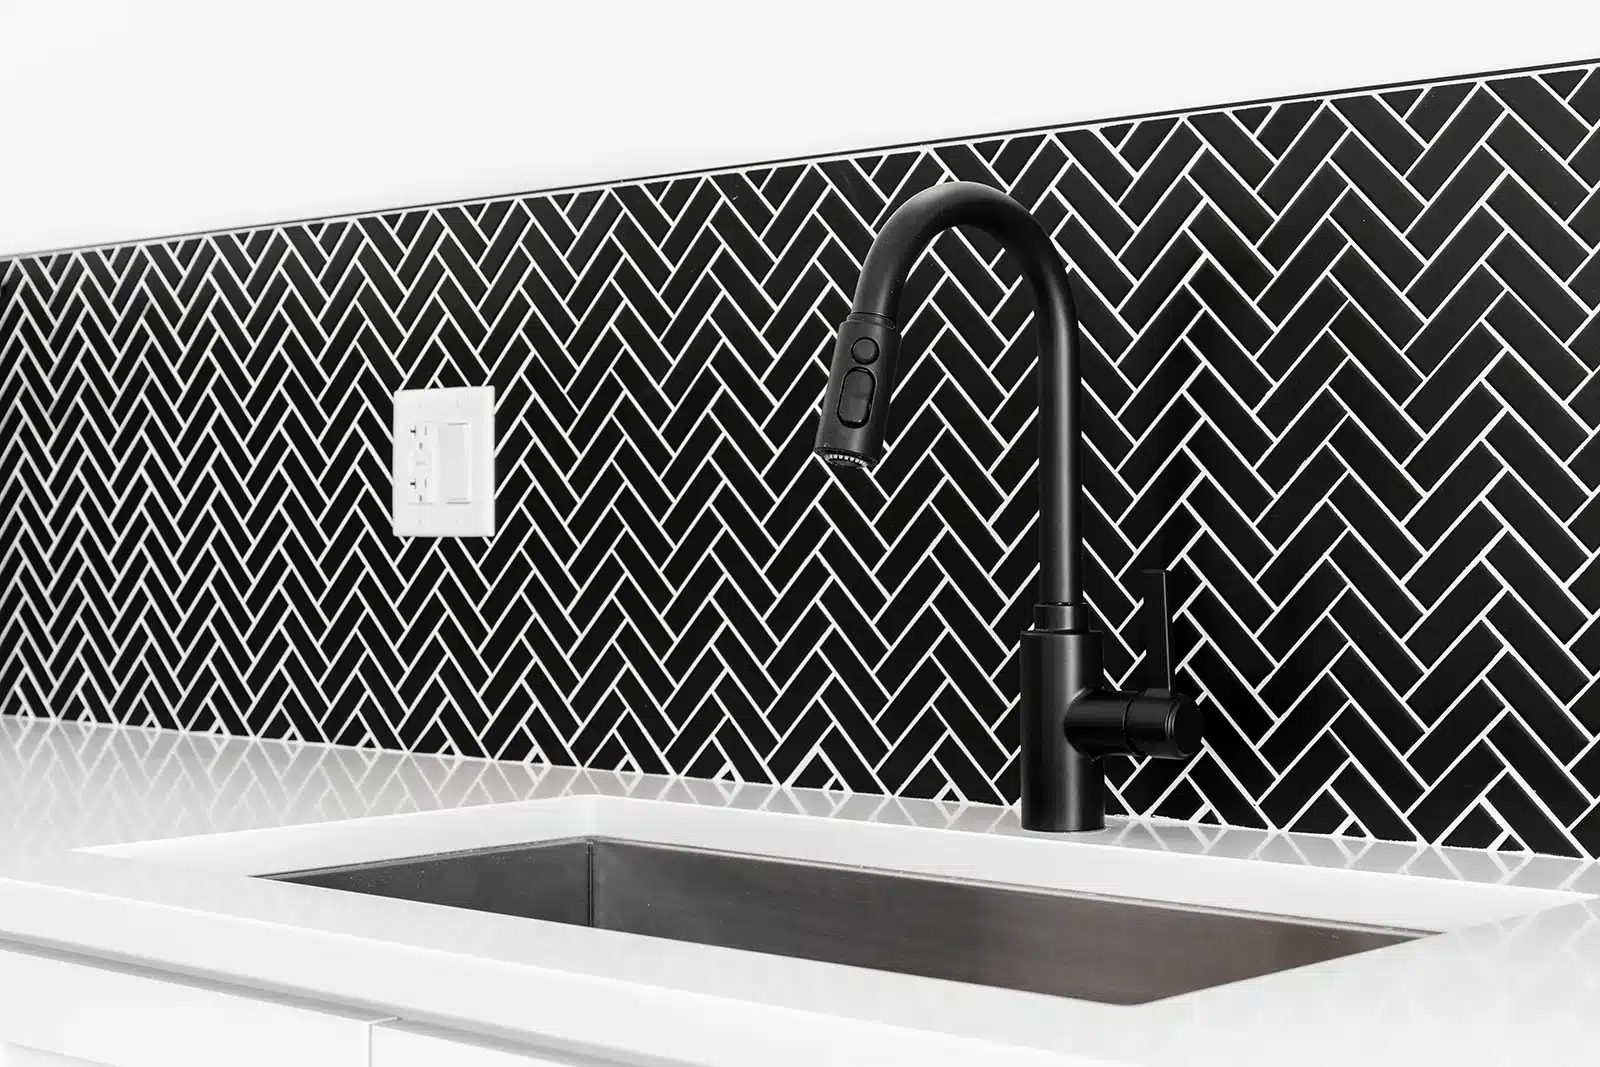 Modern kitchen with a striking black and white geometric backsplash and a matte black faucet, featuring conveniently placed electrical outlets.